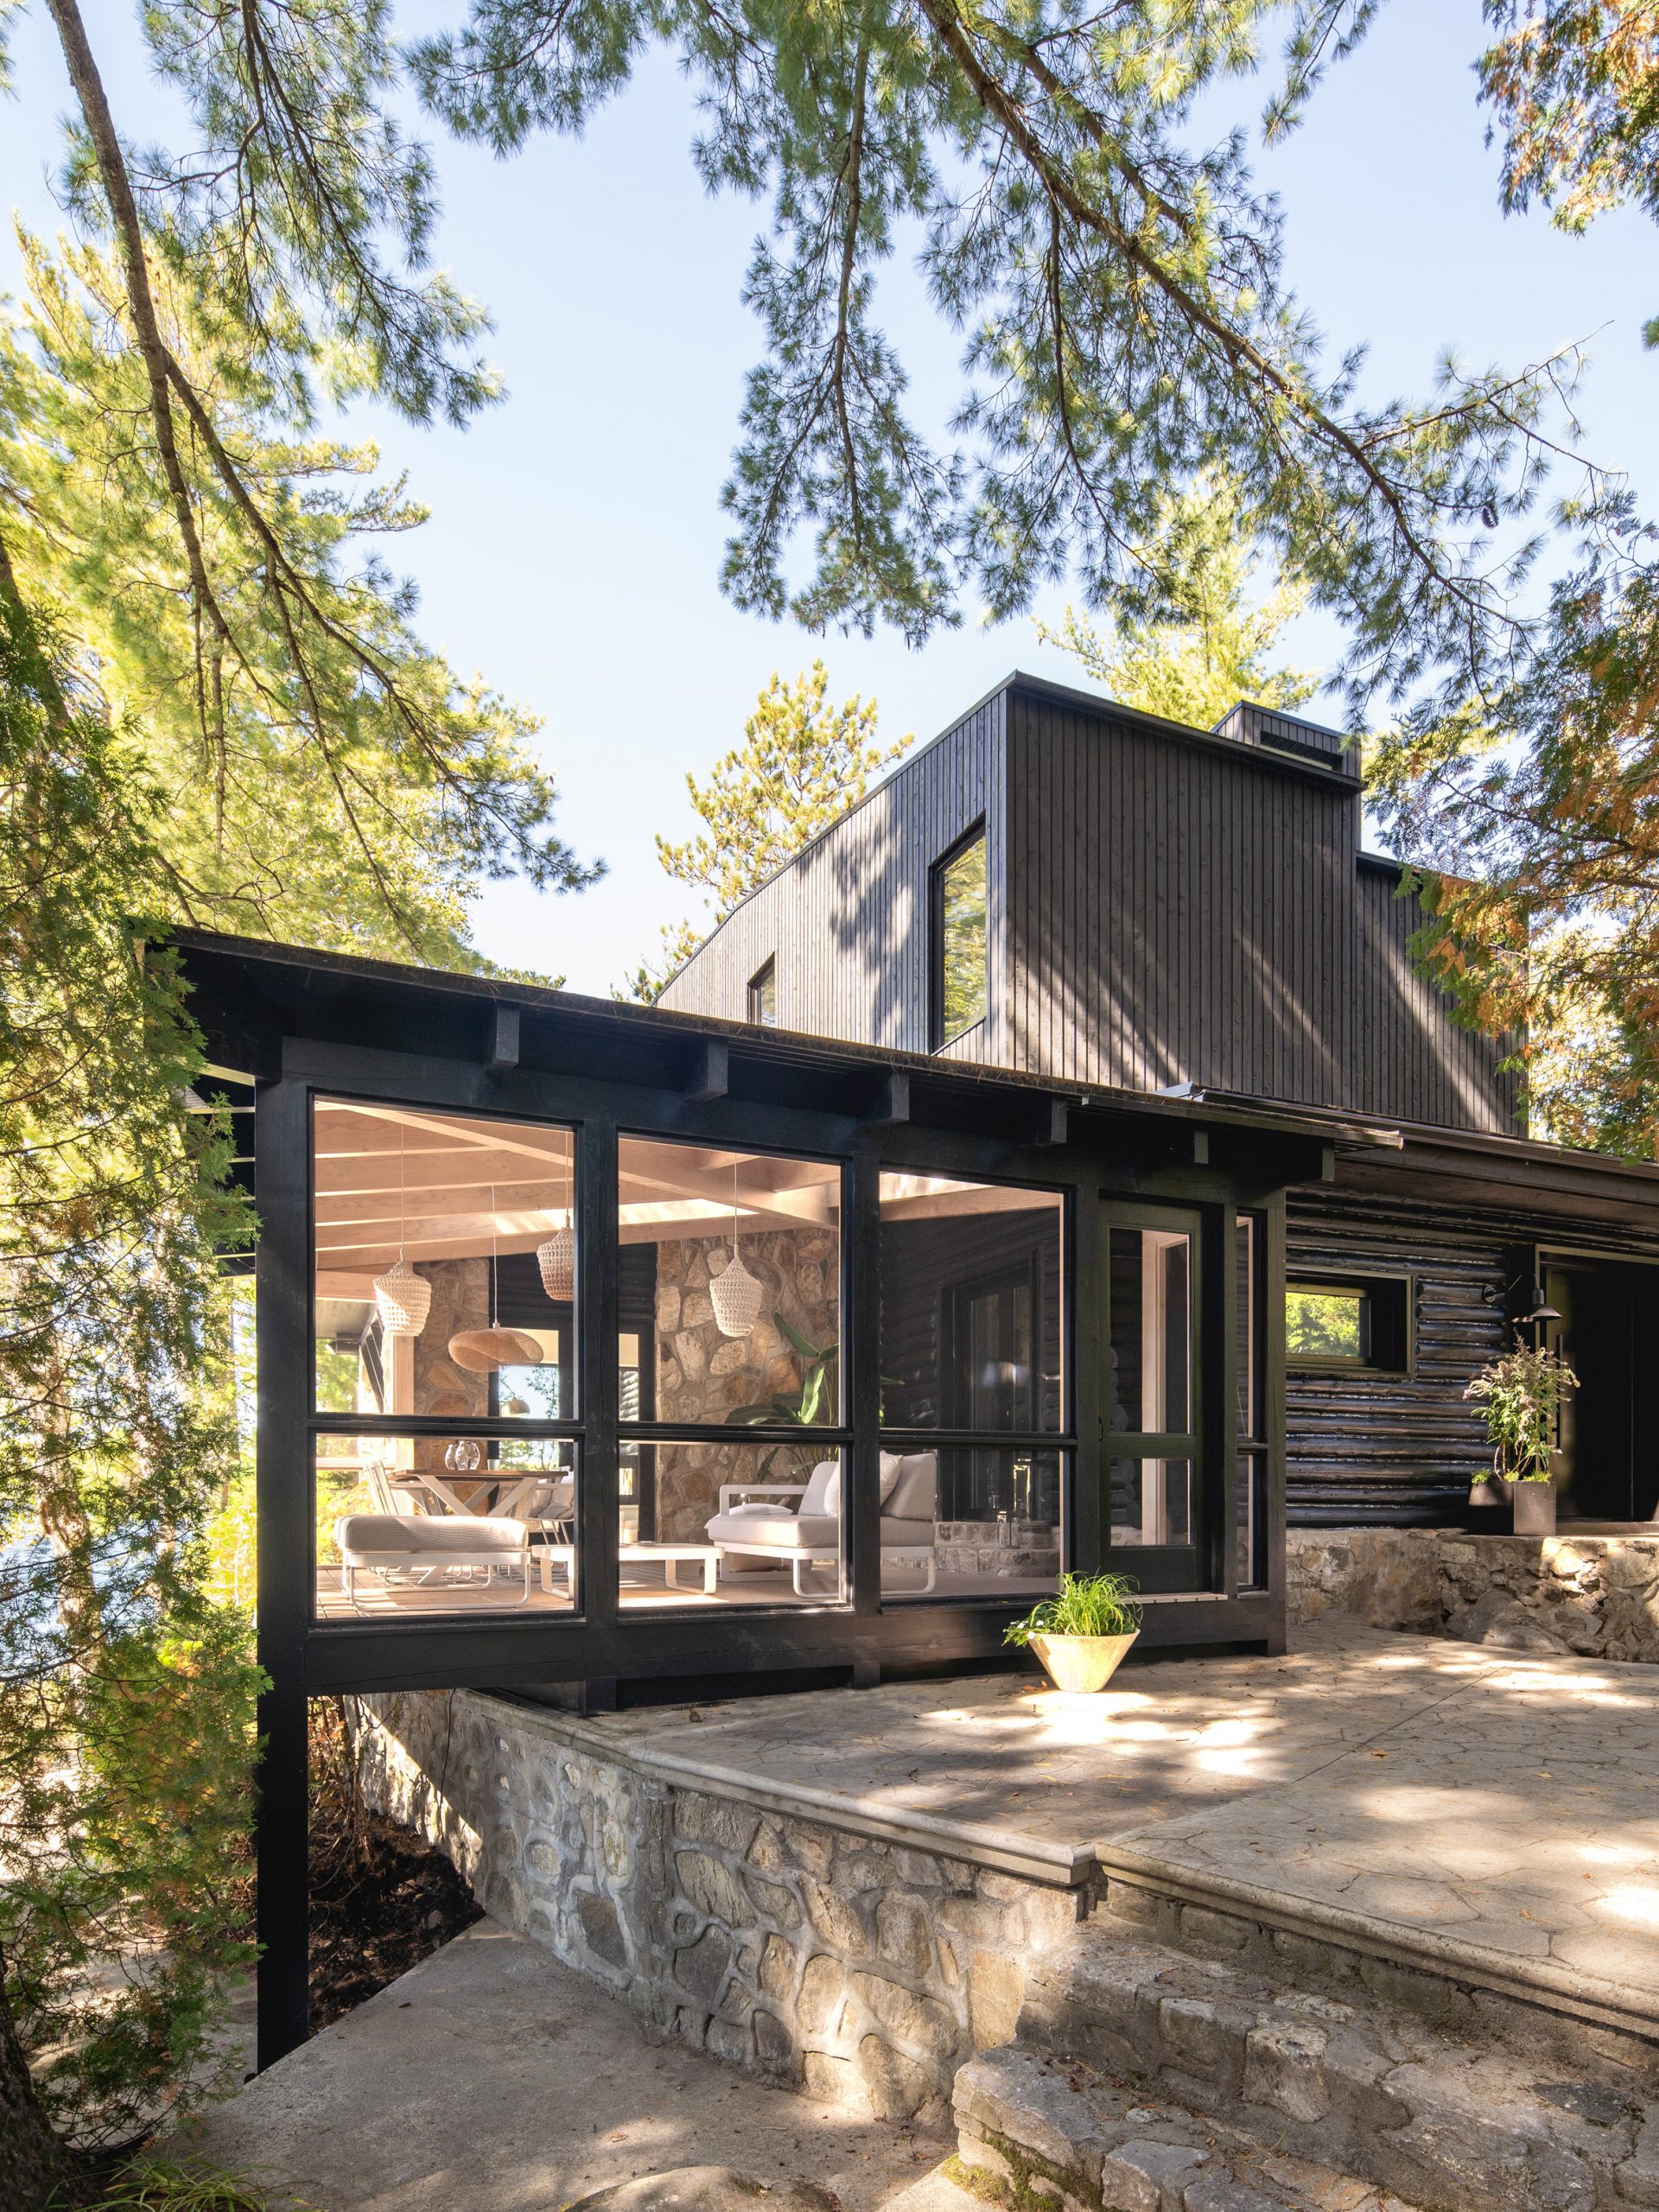 Extension to a lake house cabin in Quebec